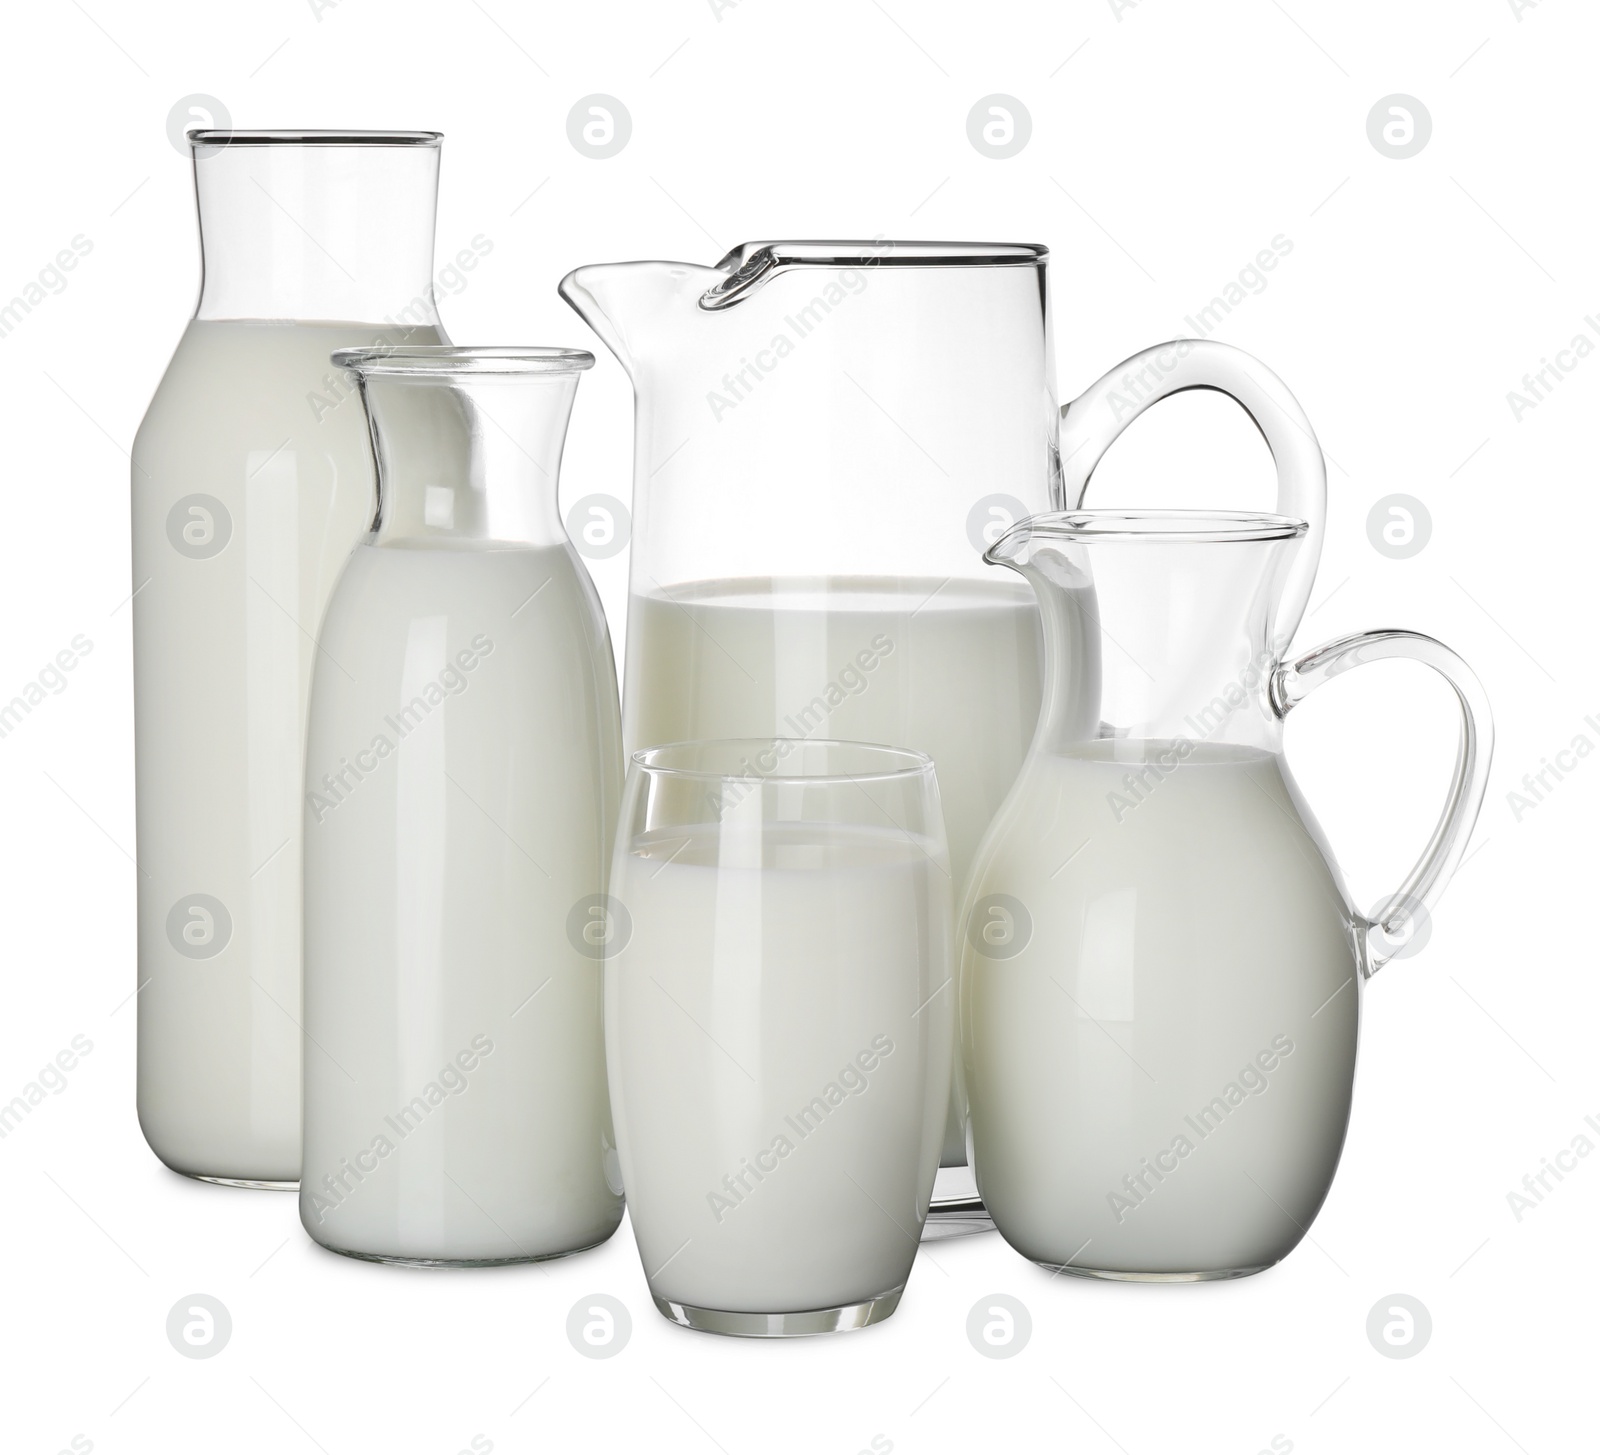 Photo of Glassware with fresh milk on black table against white background